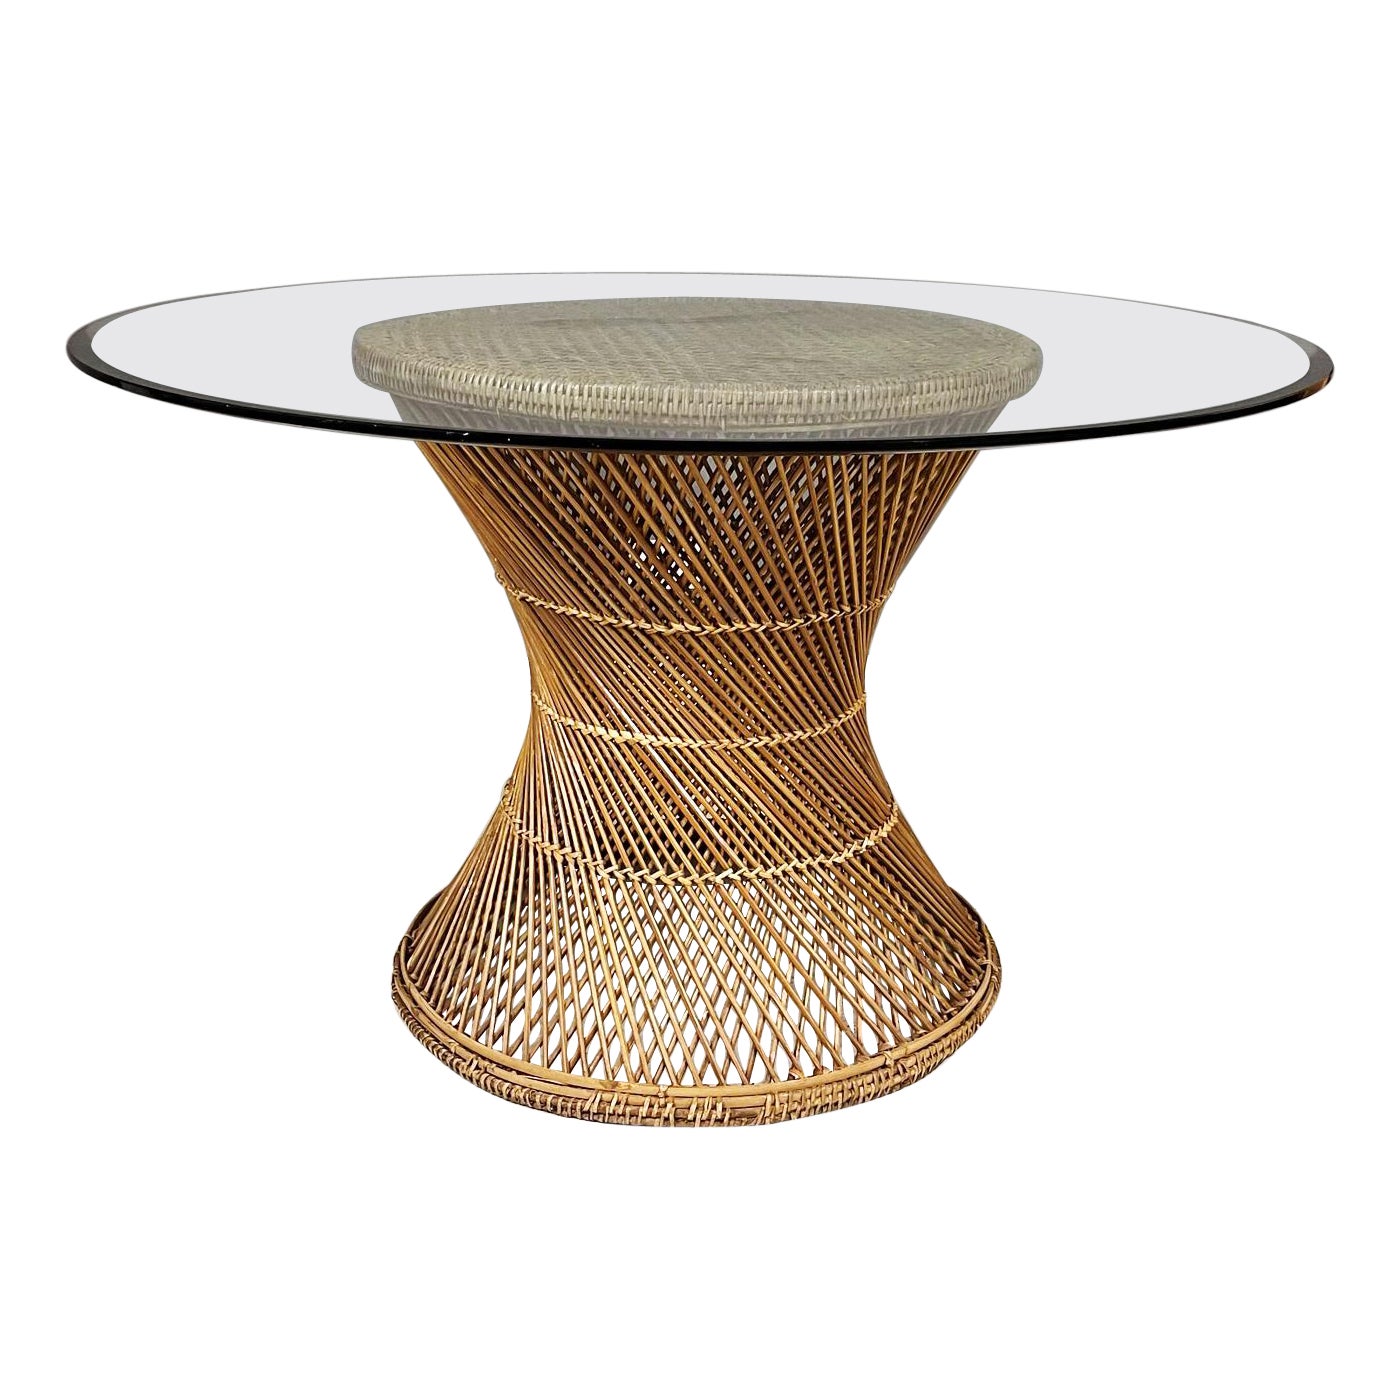 Italian mid-century Round dining table in grass and rattan, 1960s